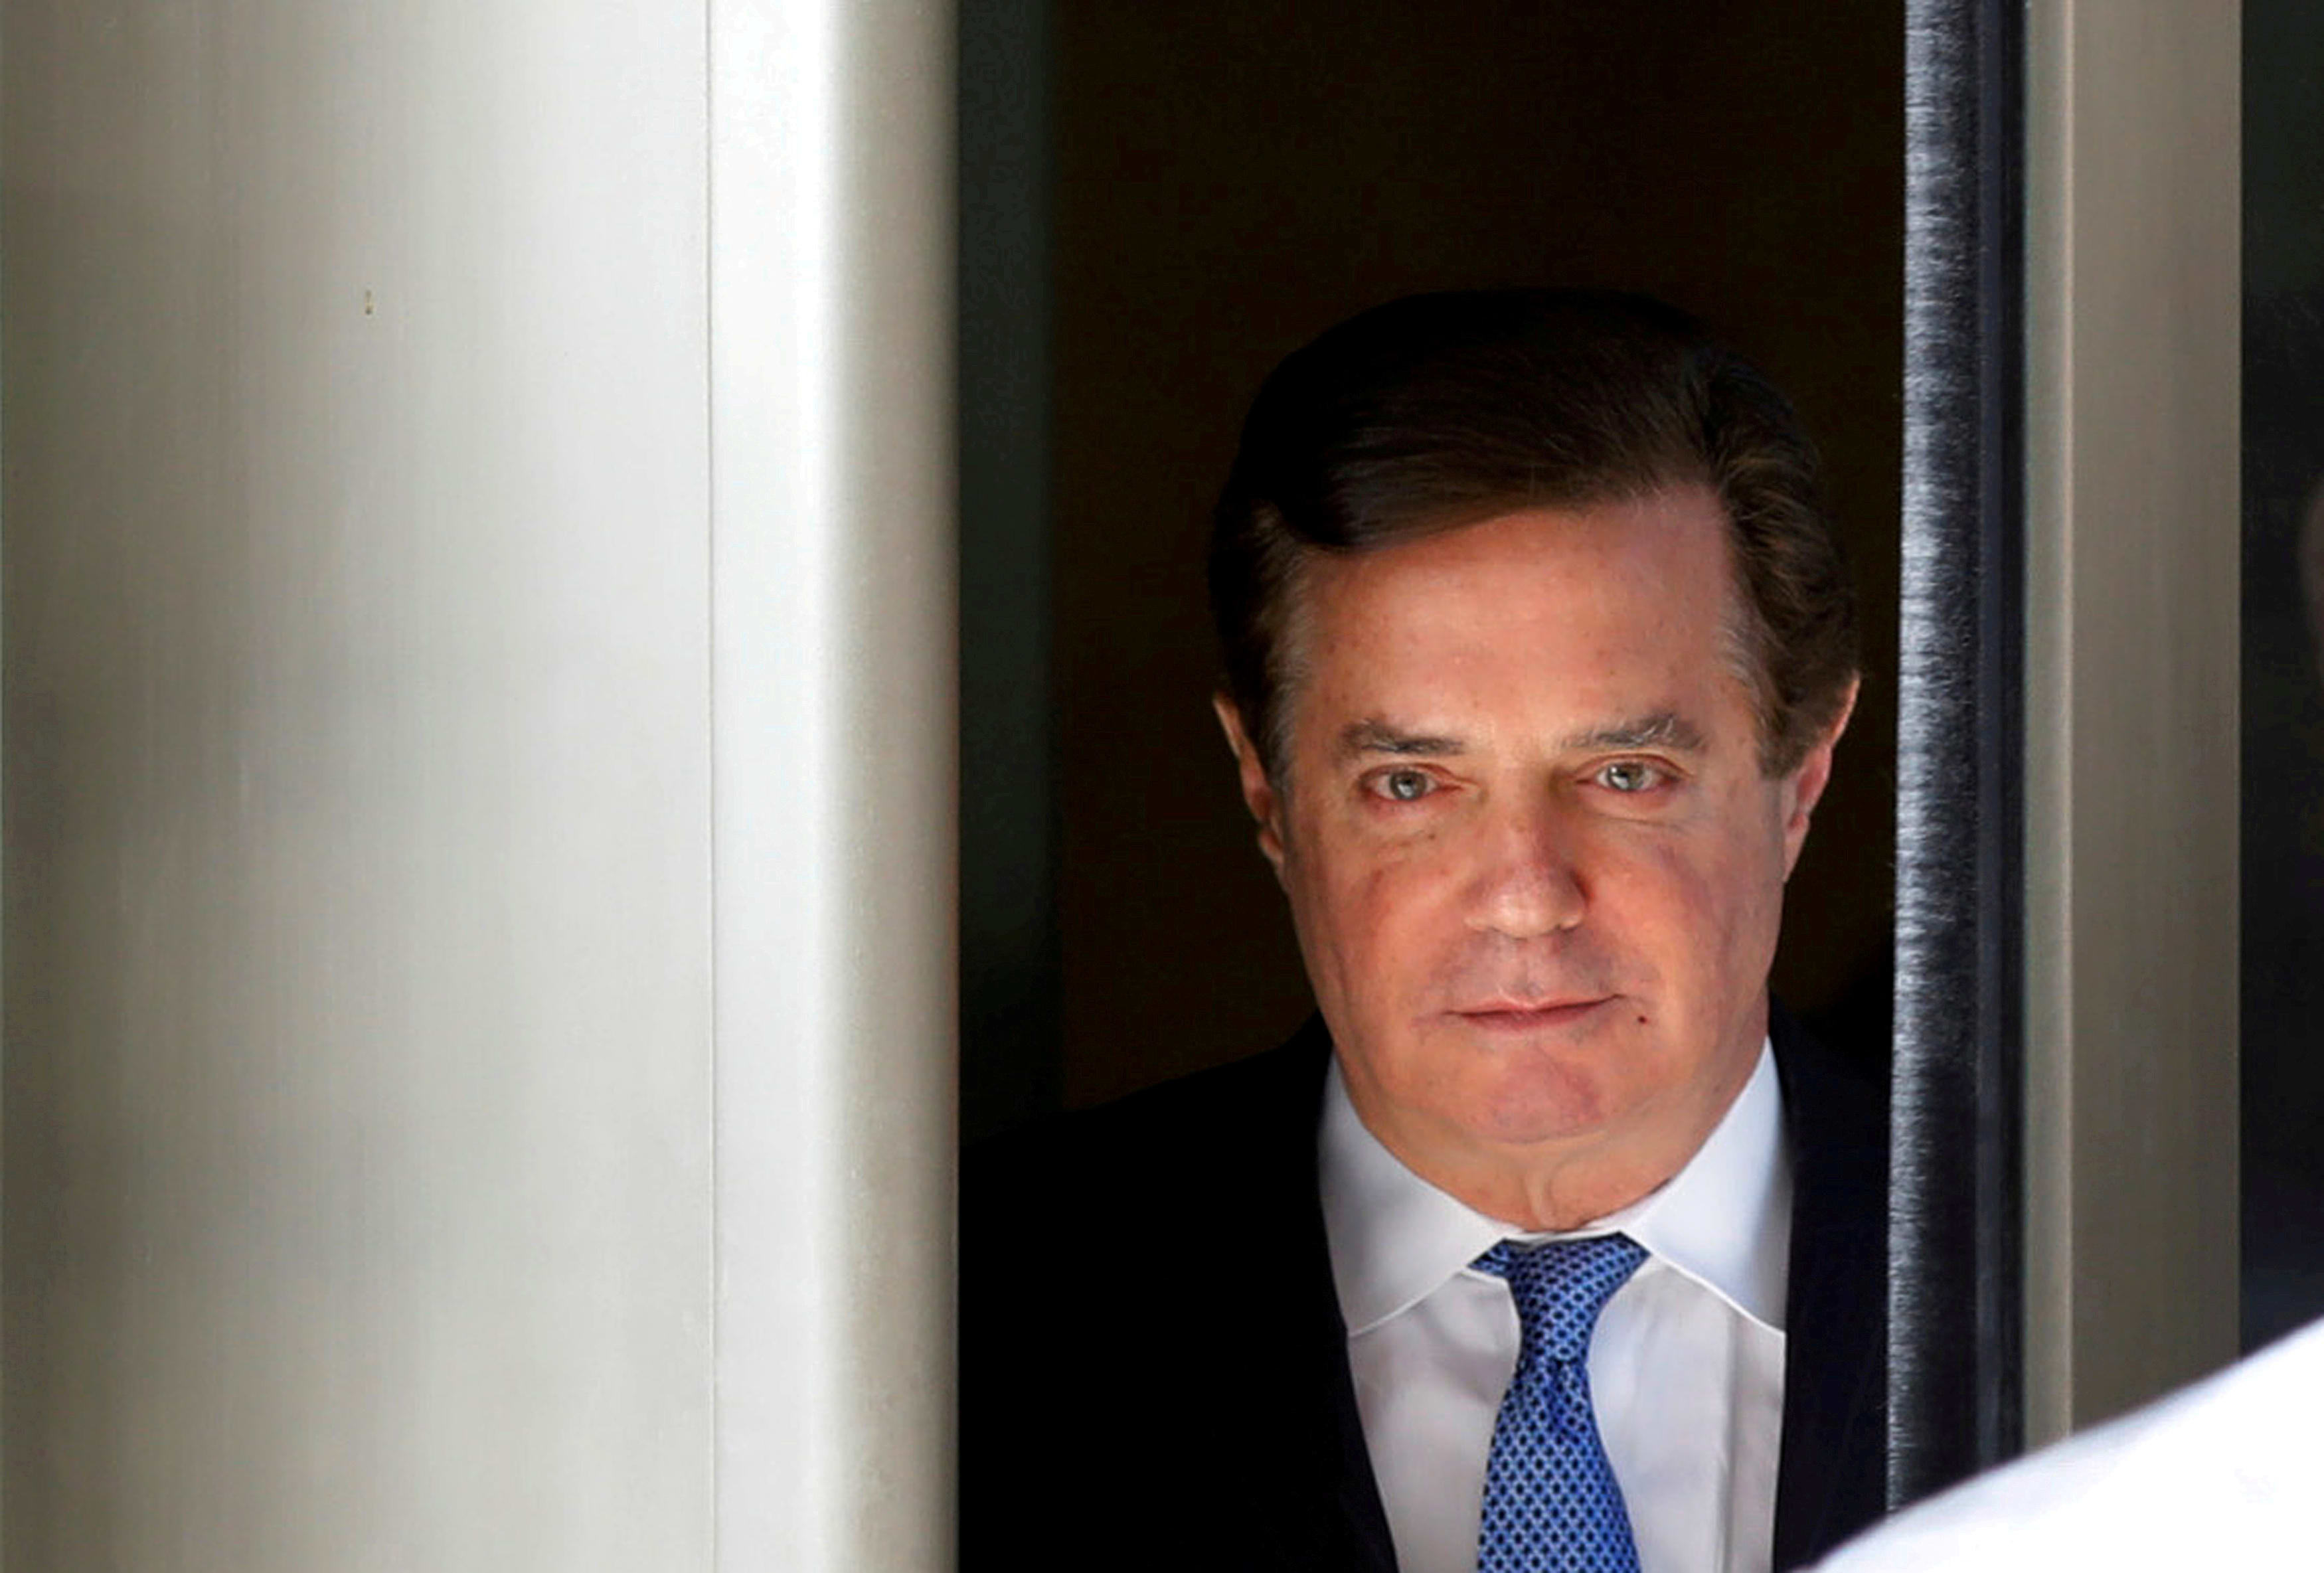 Former Trump campaign chairman Paul Manafort to be sent to New York for state charges, could be housed in notorious Rikers Island jail